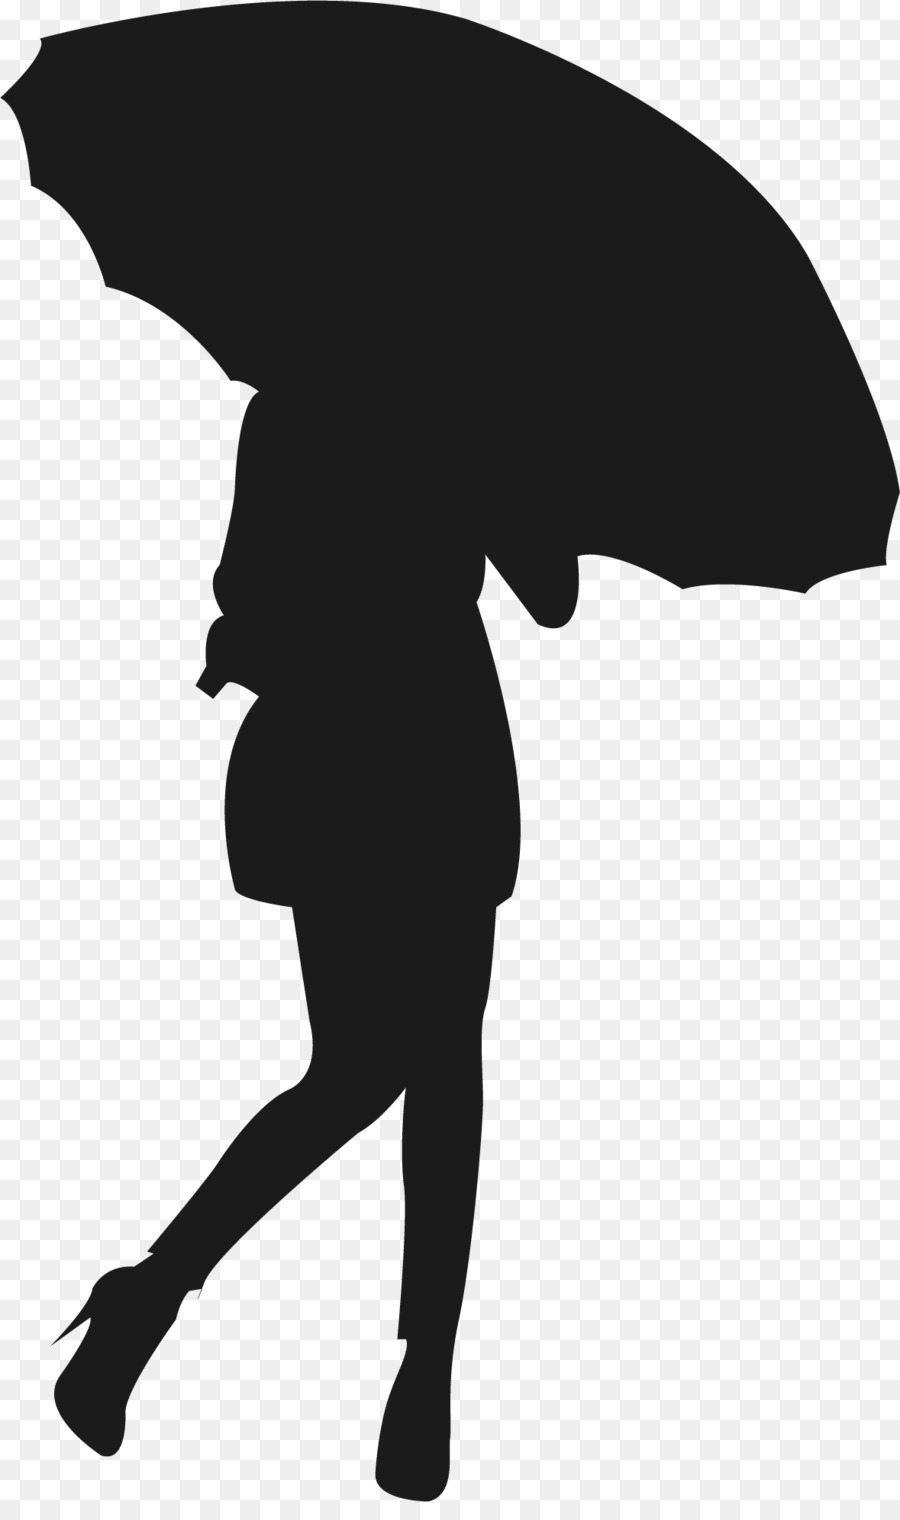 Silhouette Scalable Vector Graphics Umbrella Icon - Pedestrians in the rain png download - 1179*1968 - Free Transparent Silhouette png Download.